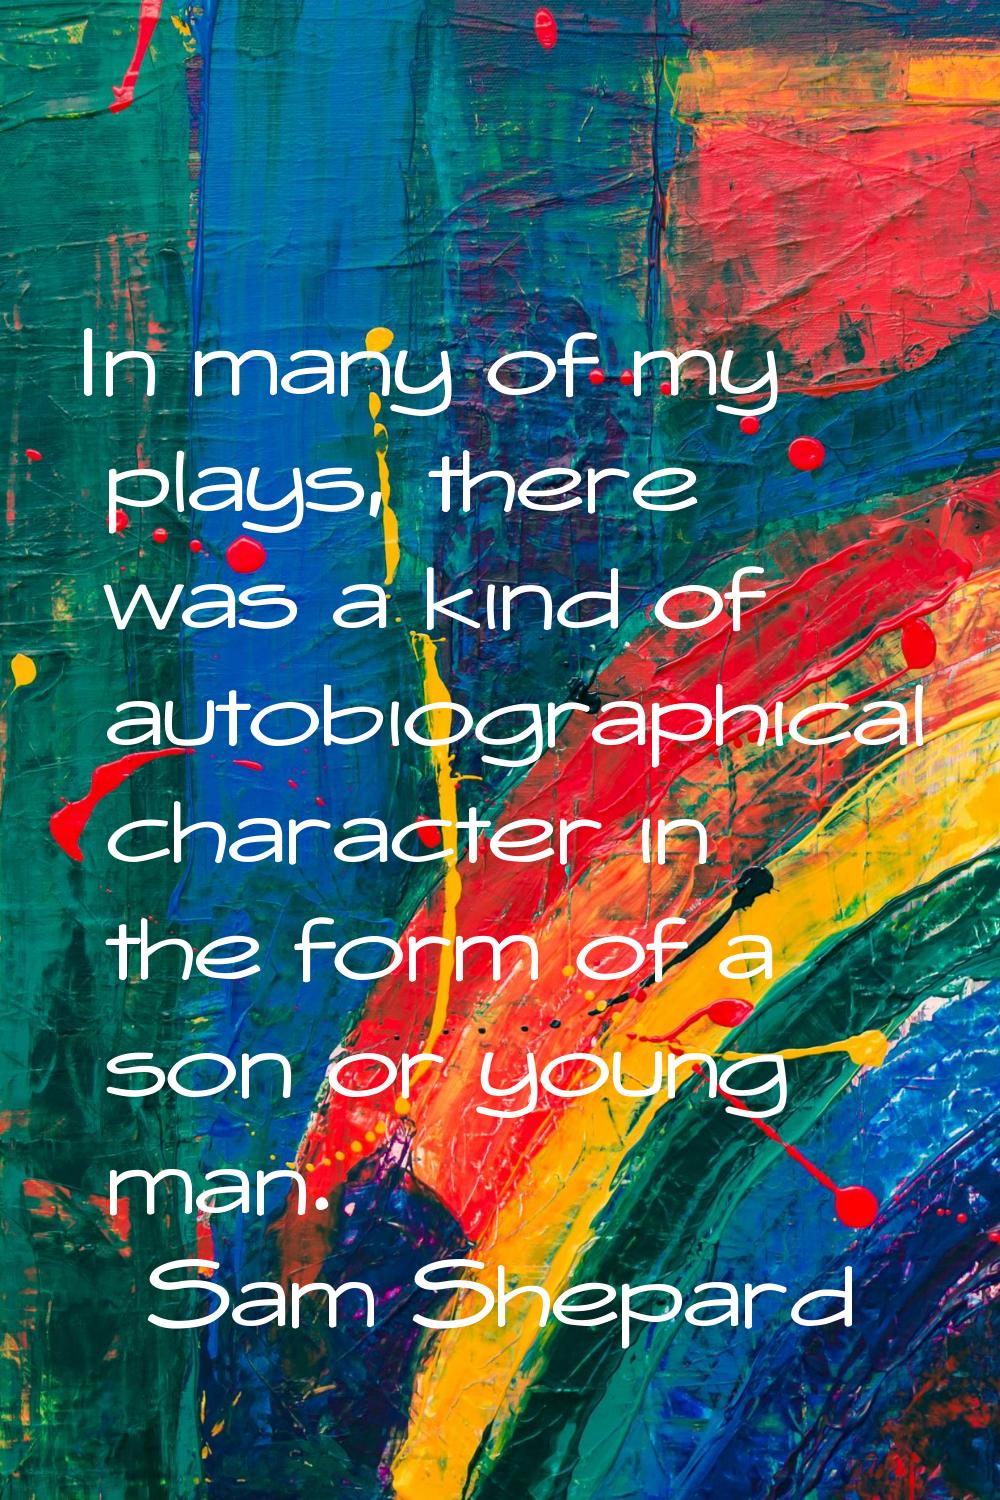 In many of my plays, there was a kind of autobiographical character in the form of a son or young m